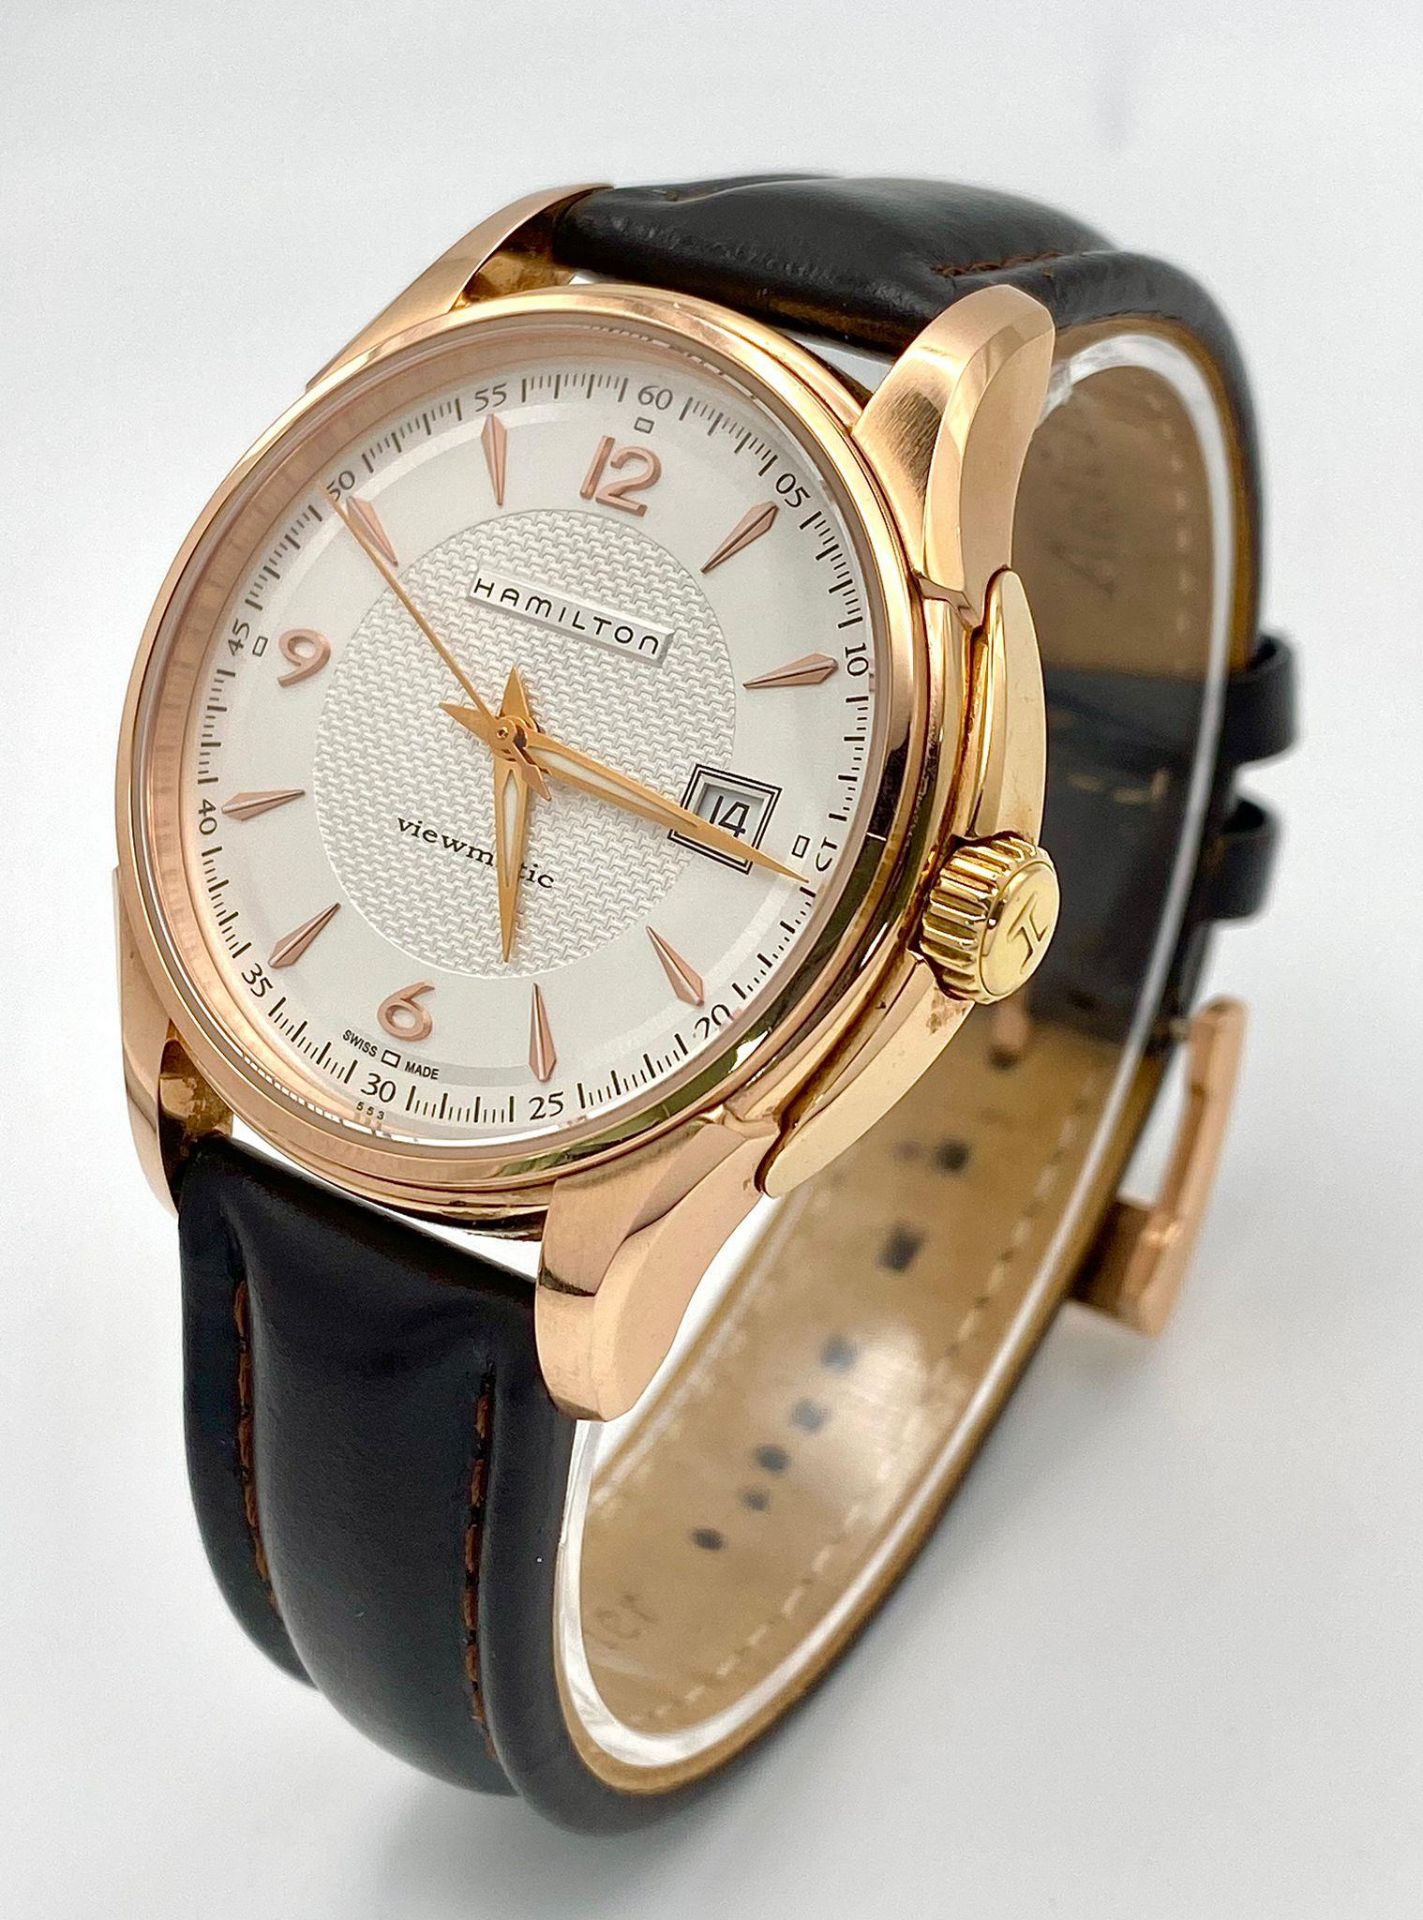 An Excellent Condition Hamilton Viewmatic Jazzmaster Rose Gold Plated Automatic Date Watch Model